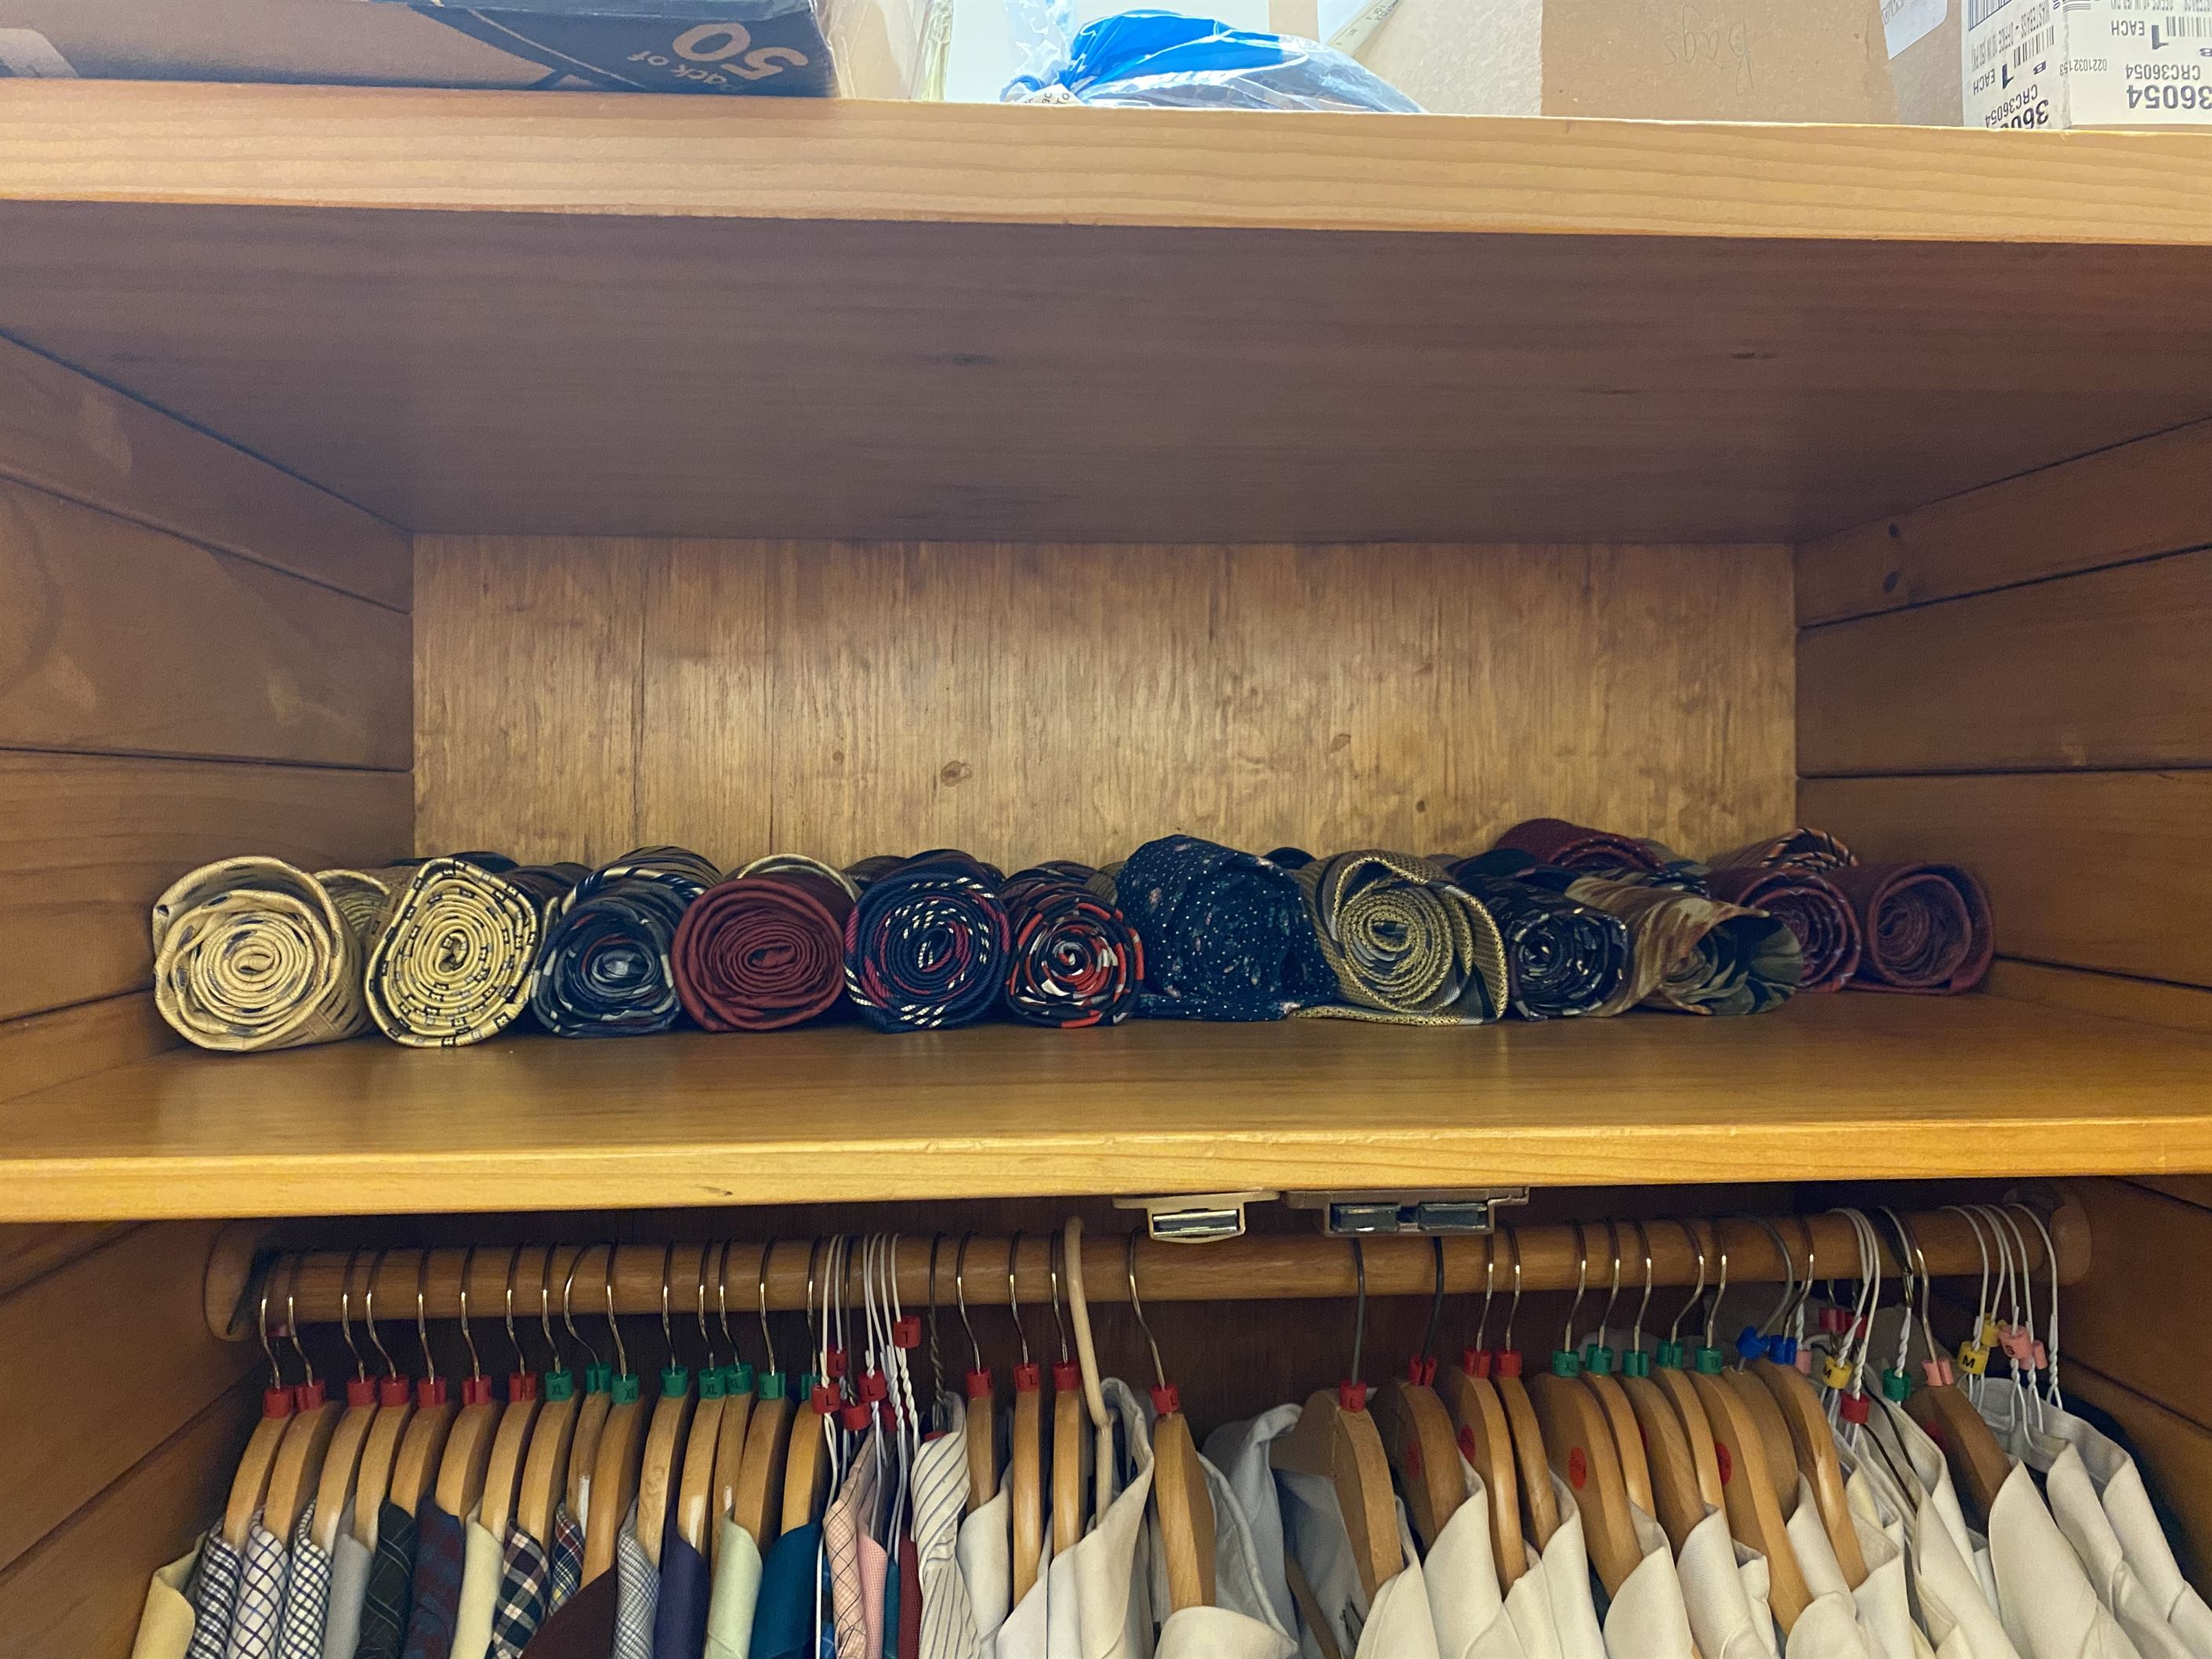 Besides suits, the closet provides a variety of other clothing items for students to look their best.
Crystal Durham | The Montclarion